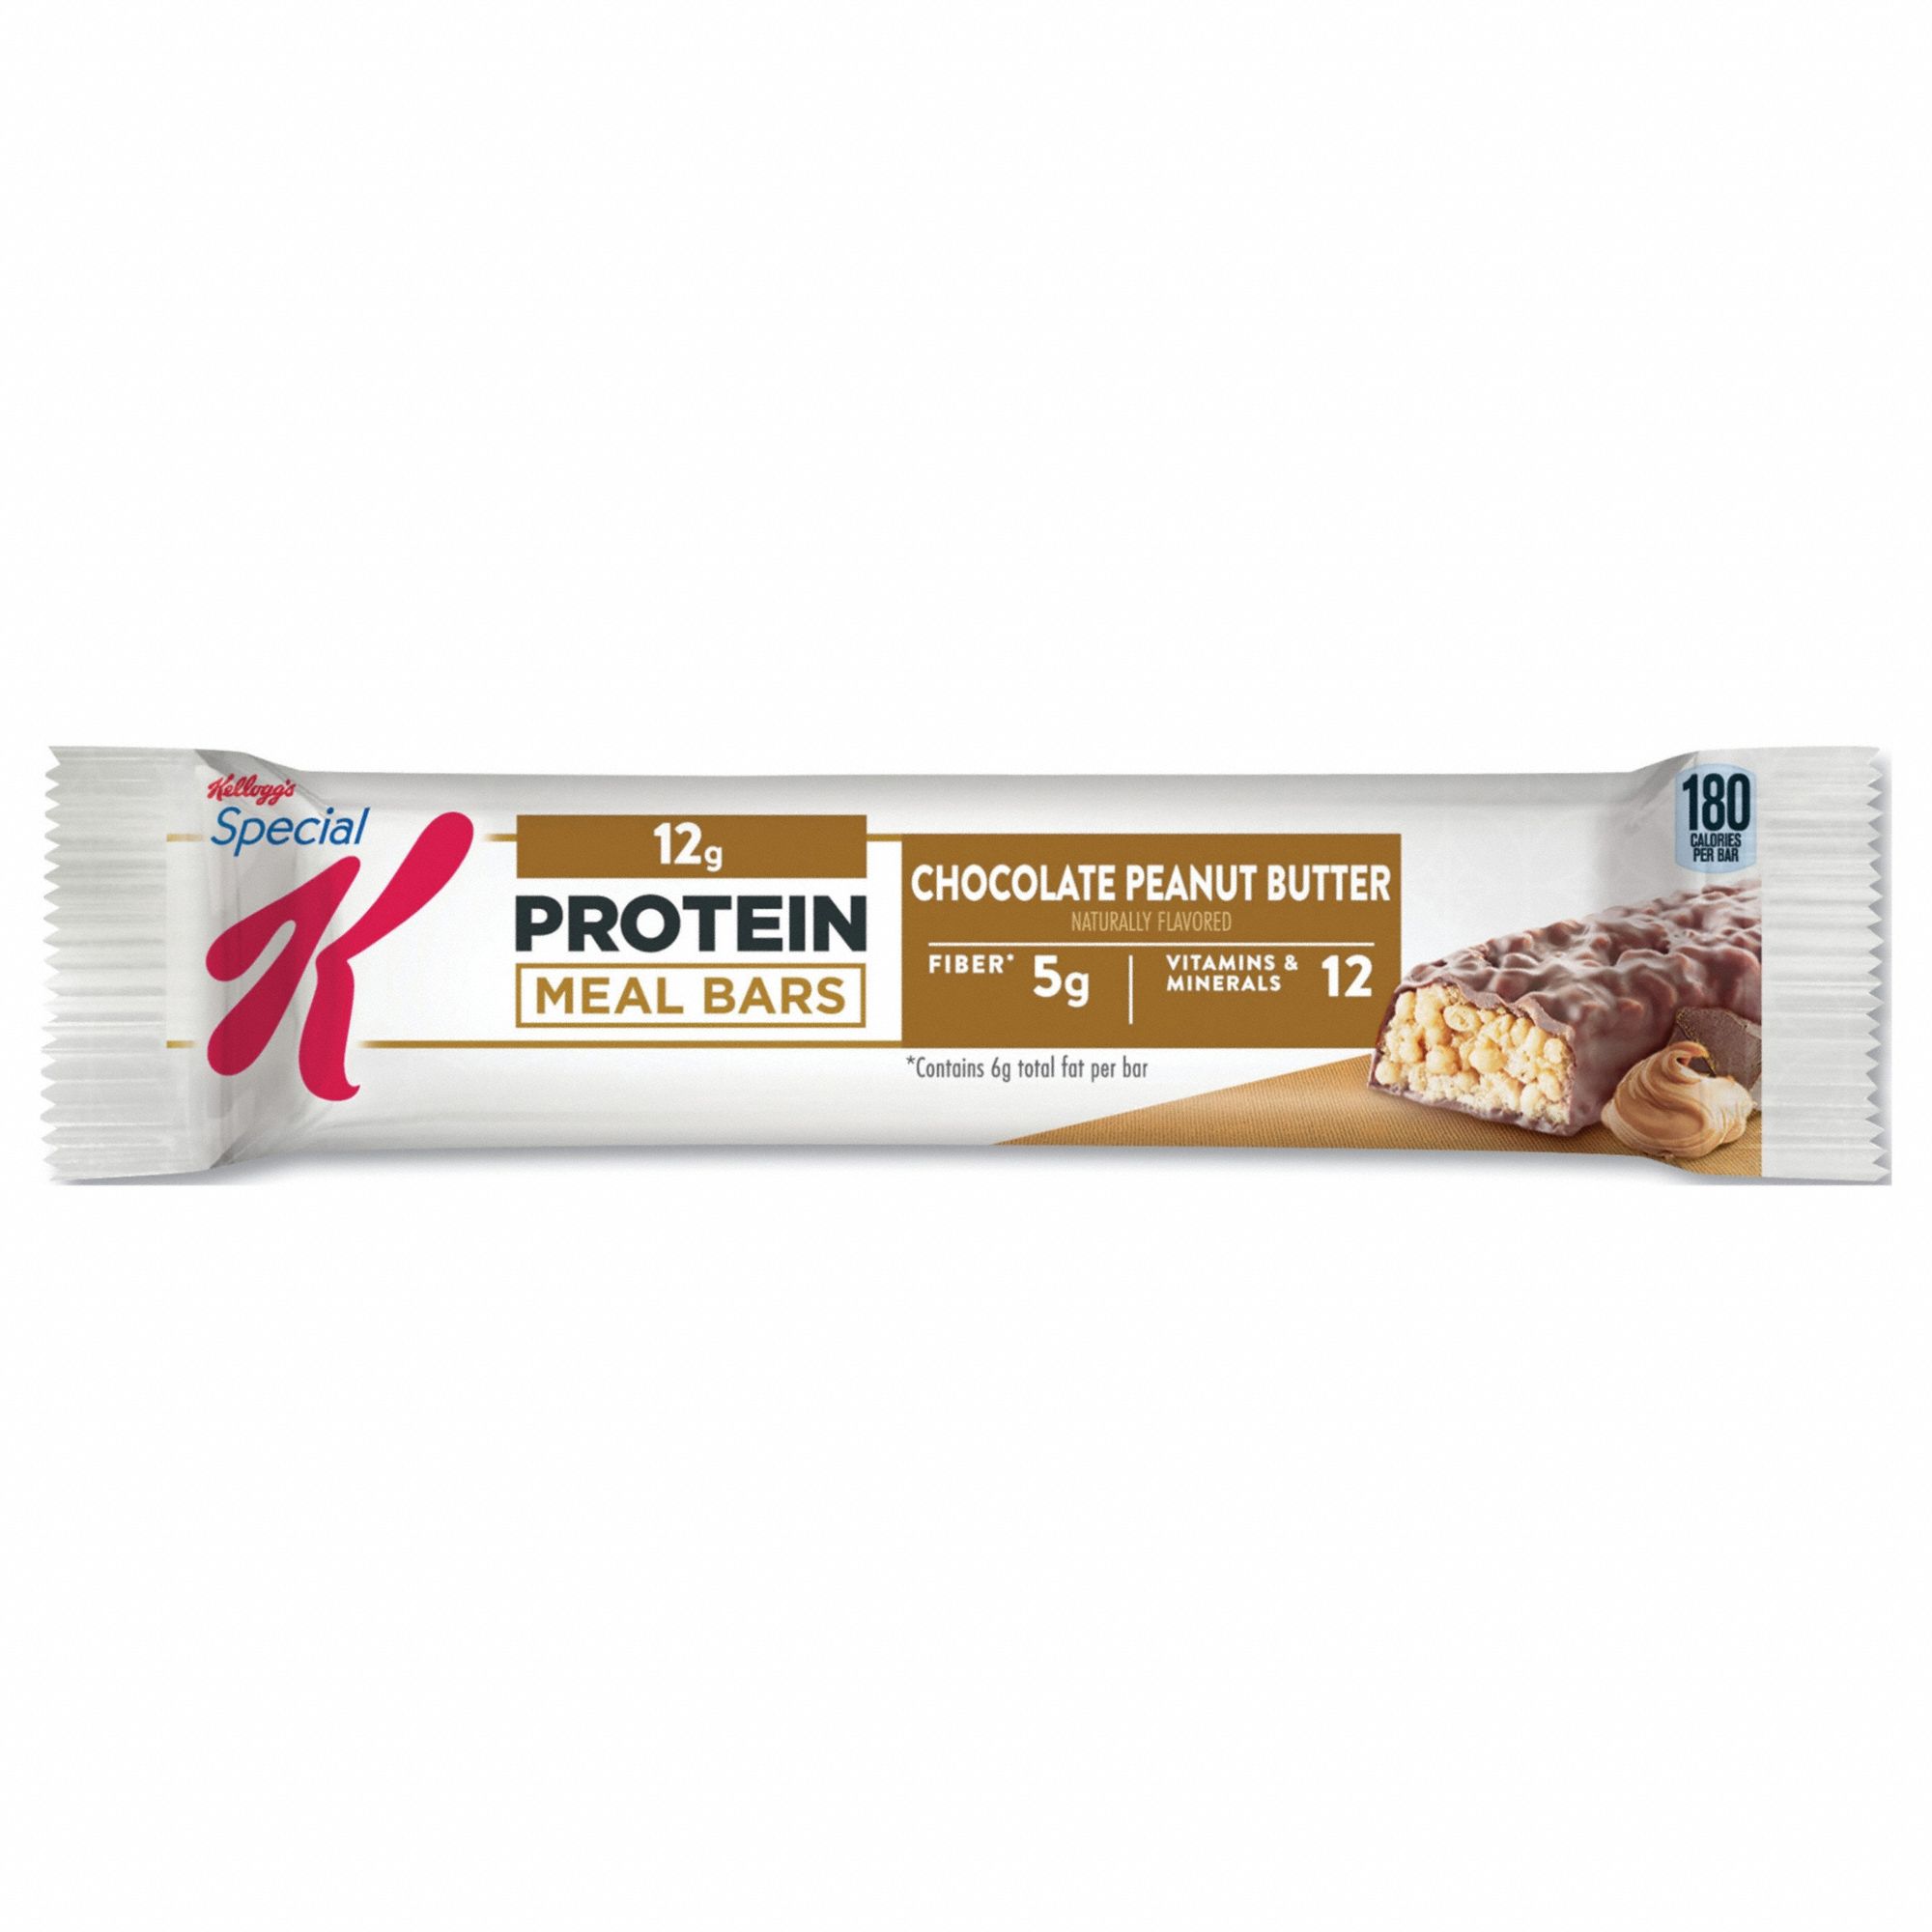 Kellogg's(R) Special K(R) Protein Meal Bars: Chocolate/Peanut Butter, 1.59 oz Size, 8 PK